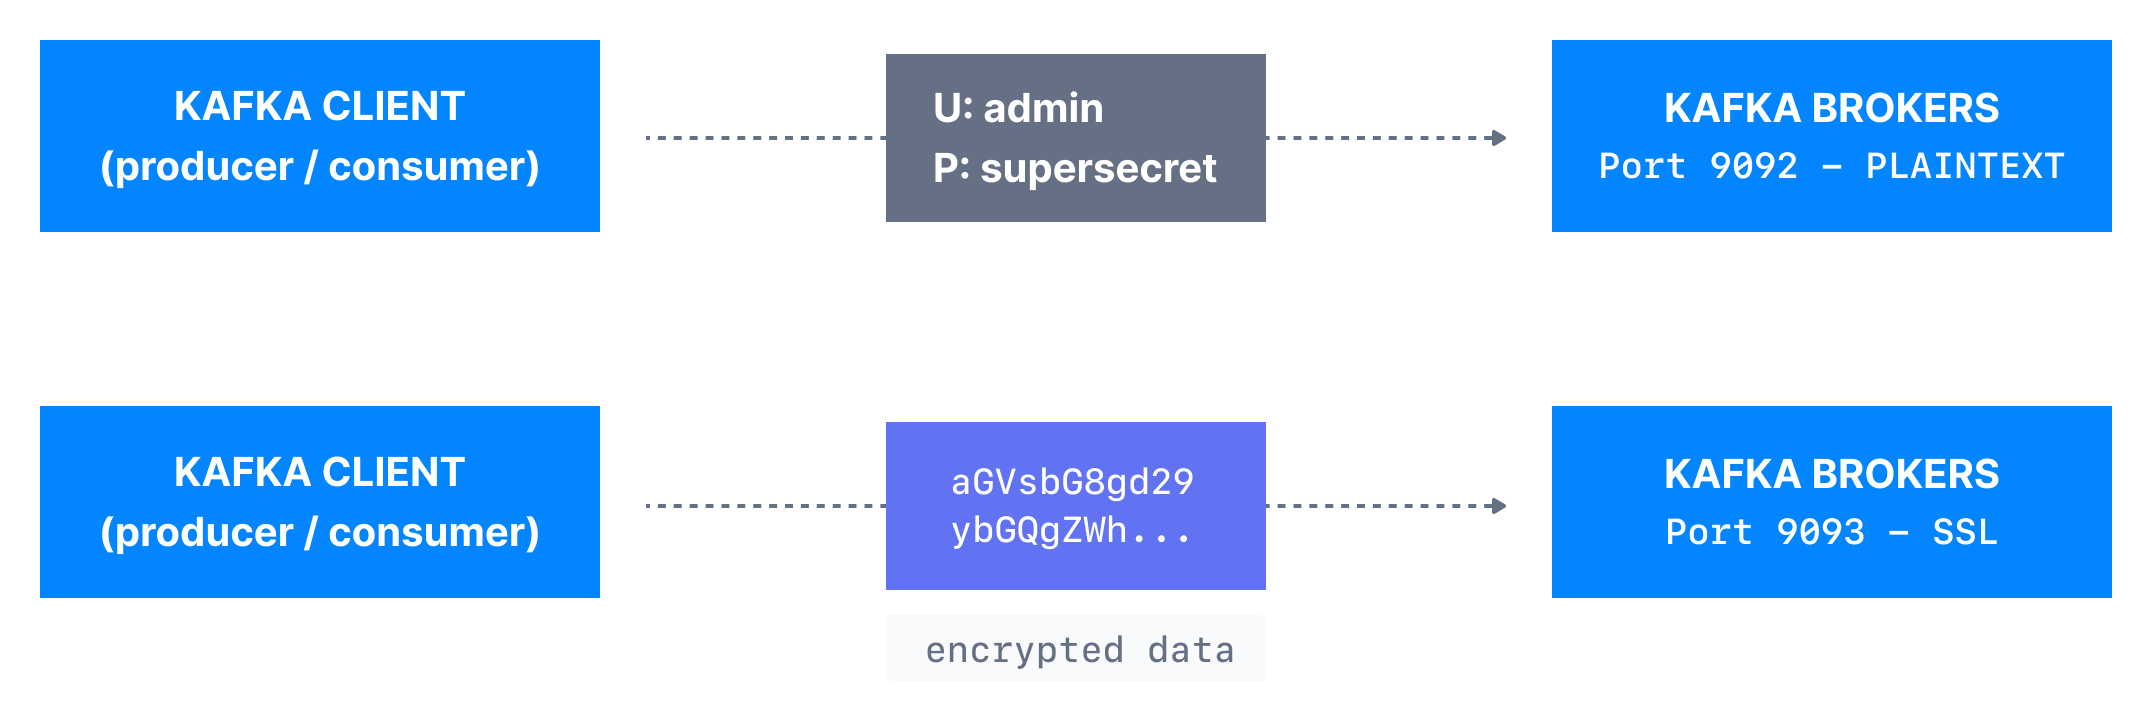 Diagram showing how SSL encryption can be used to secure Kafka data